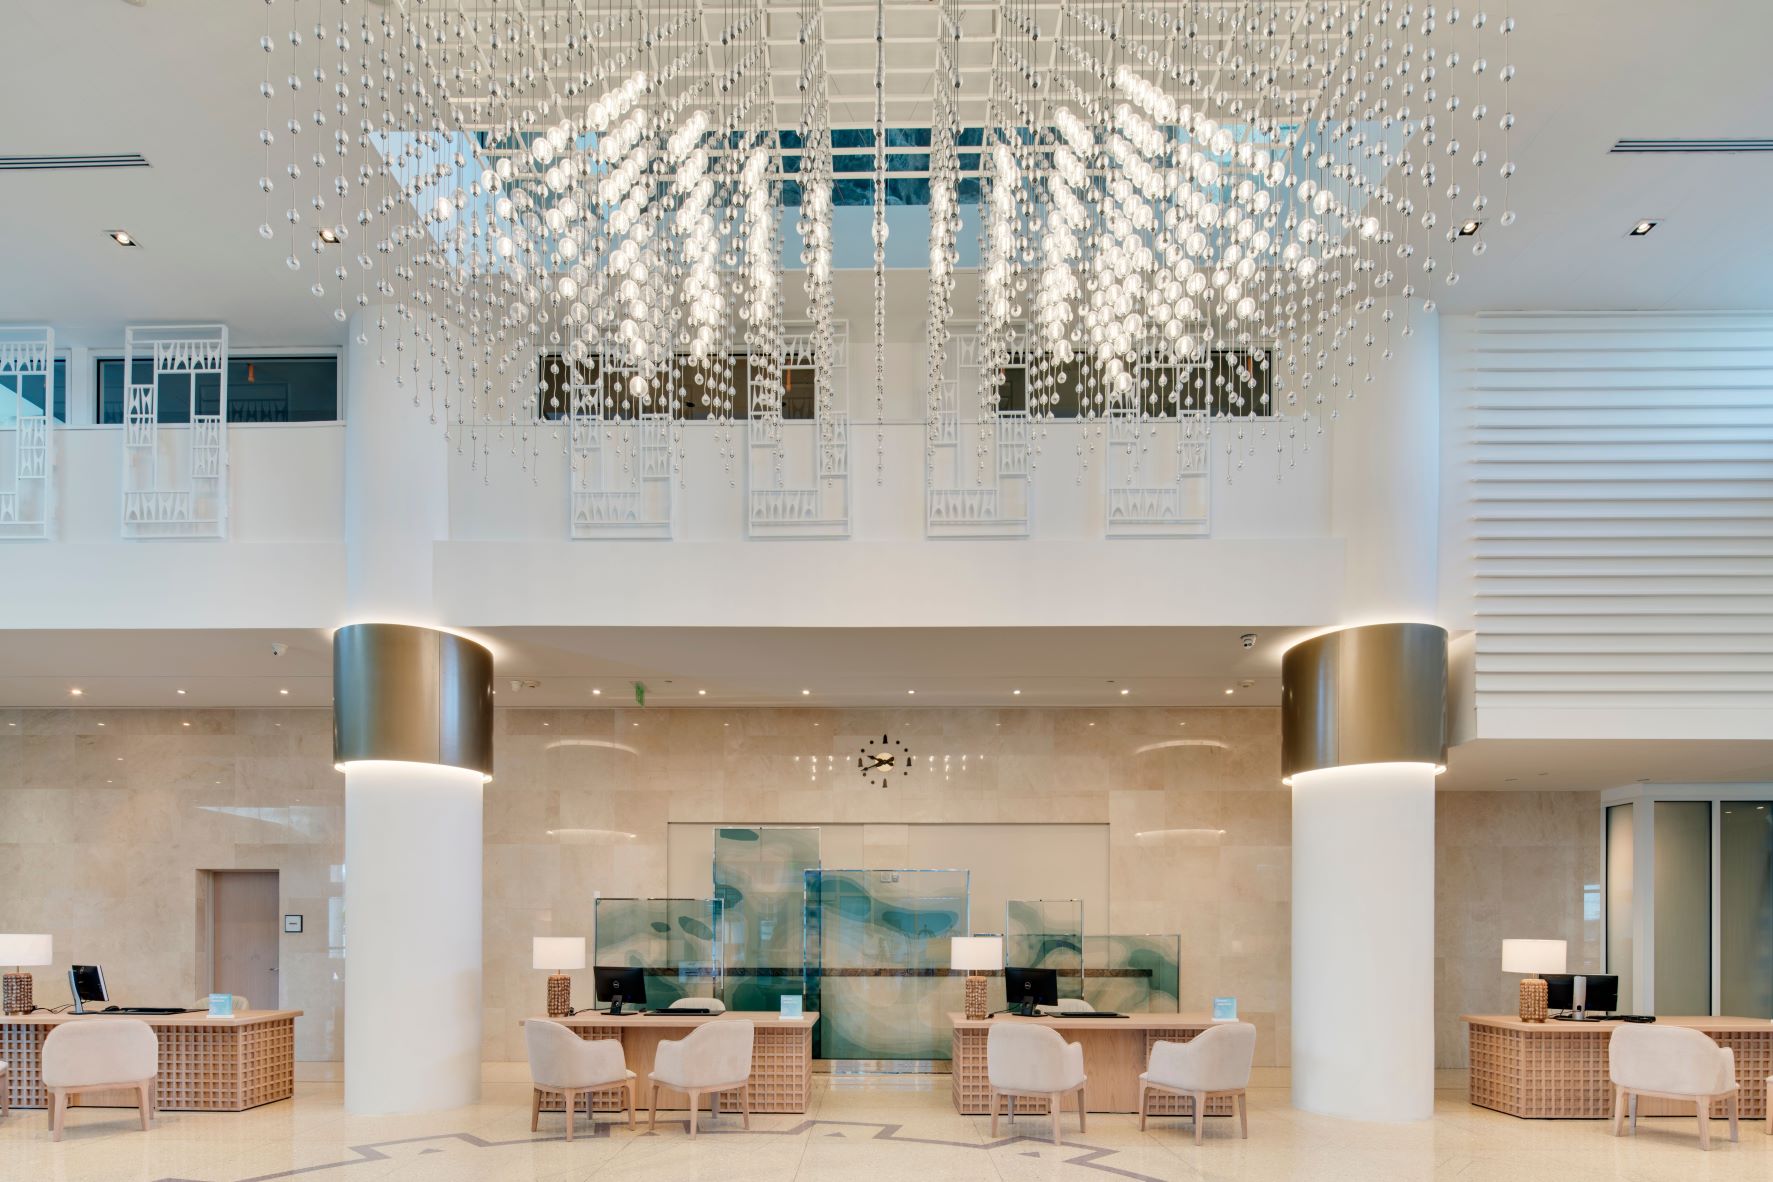 Image of the Carillon's lobby which includes reception desks and a string light chandelier